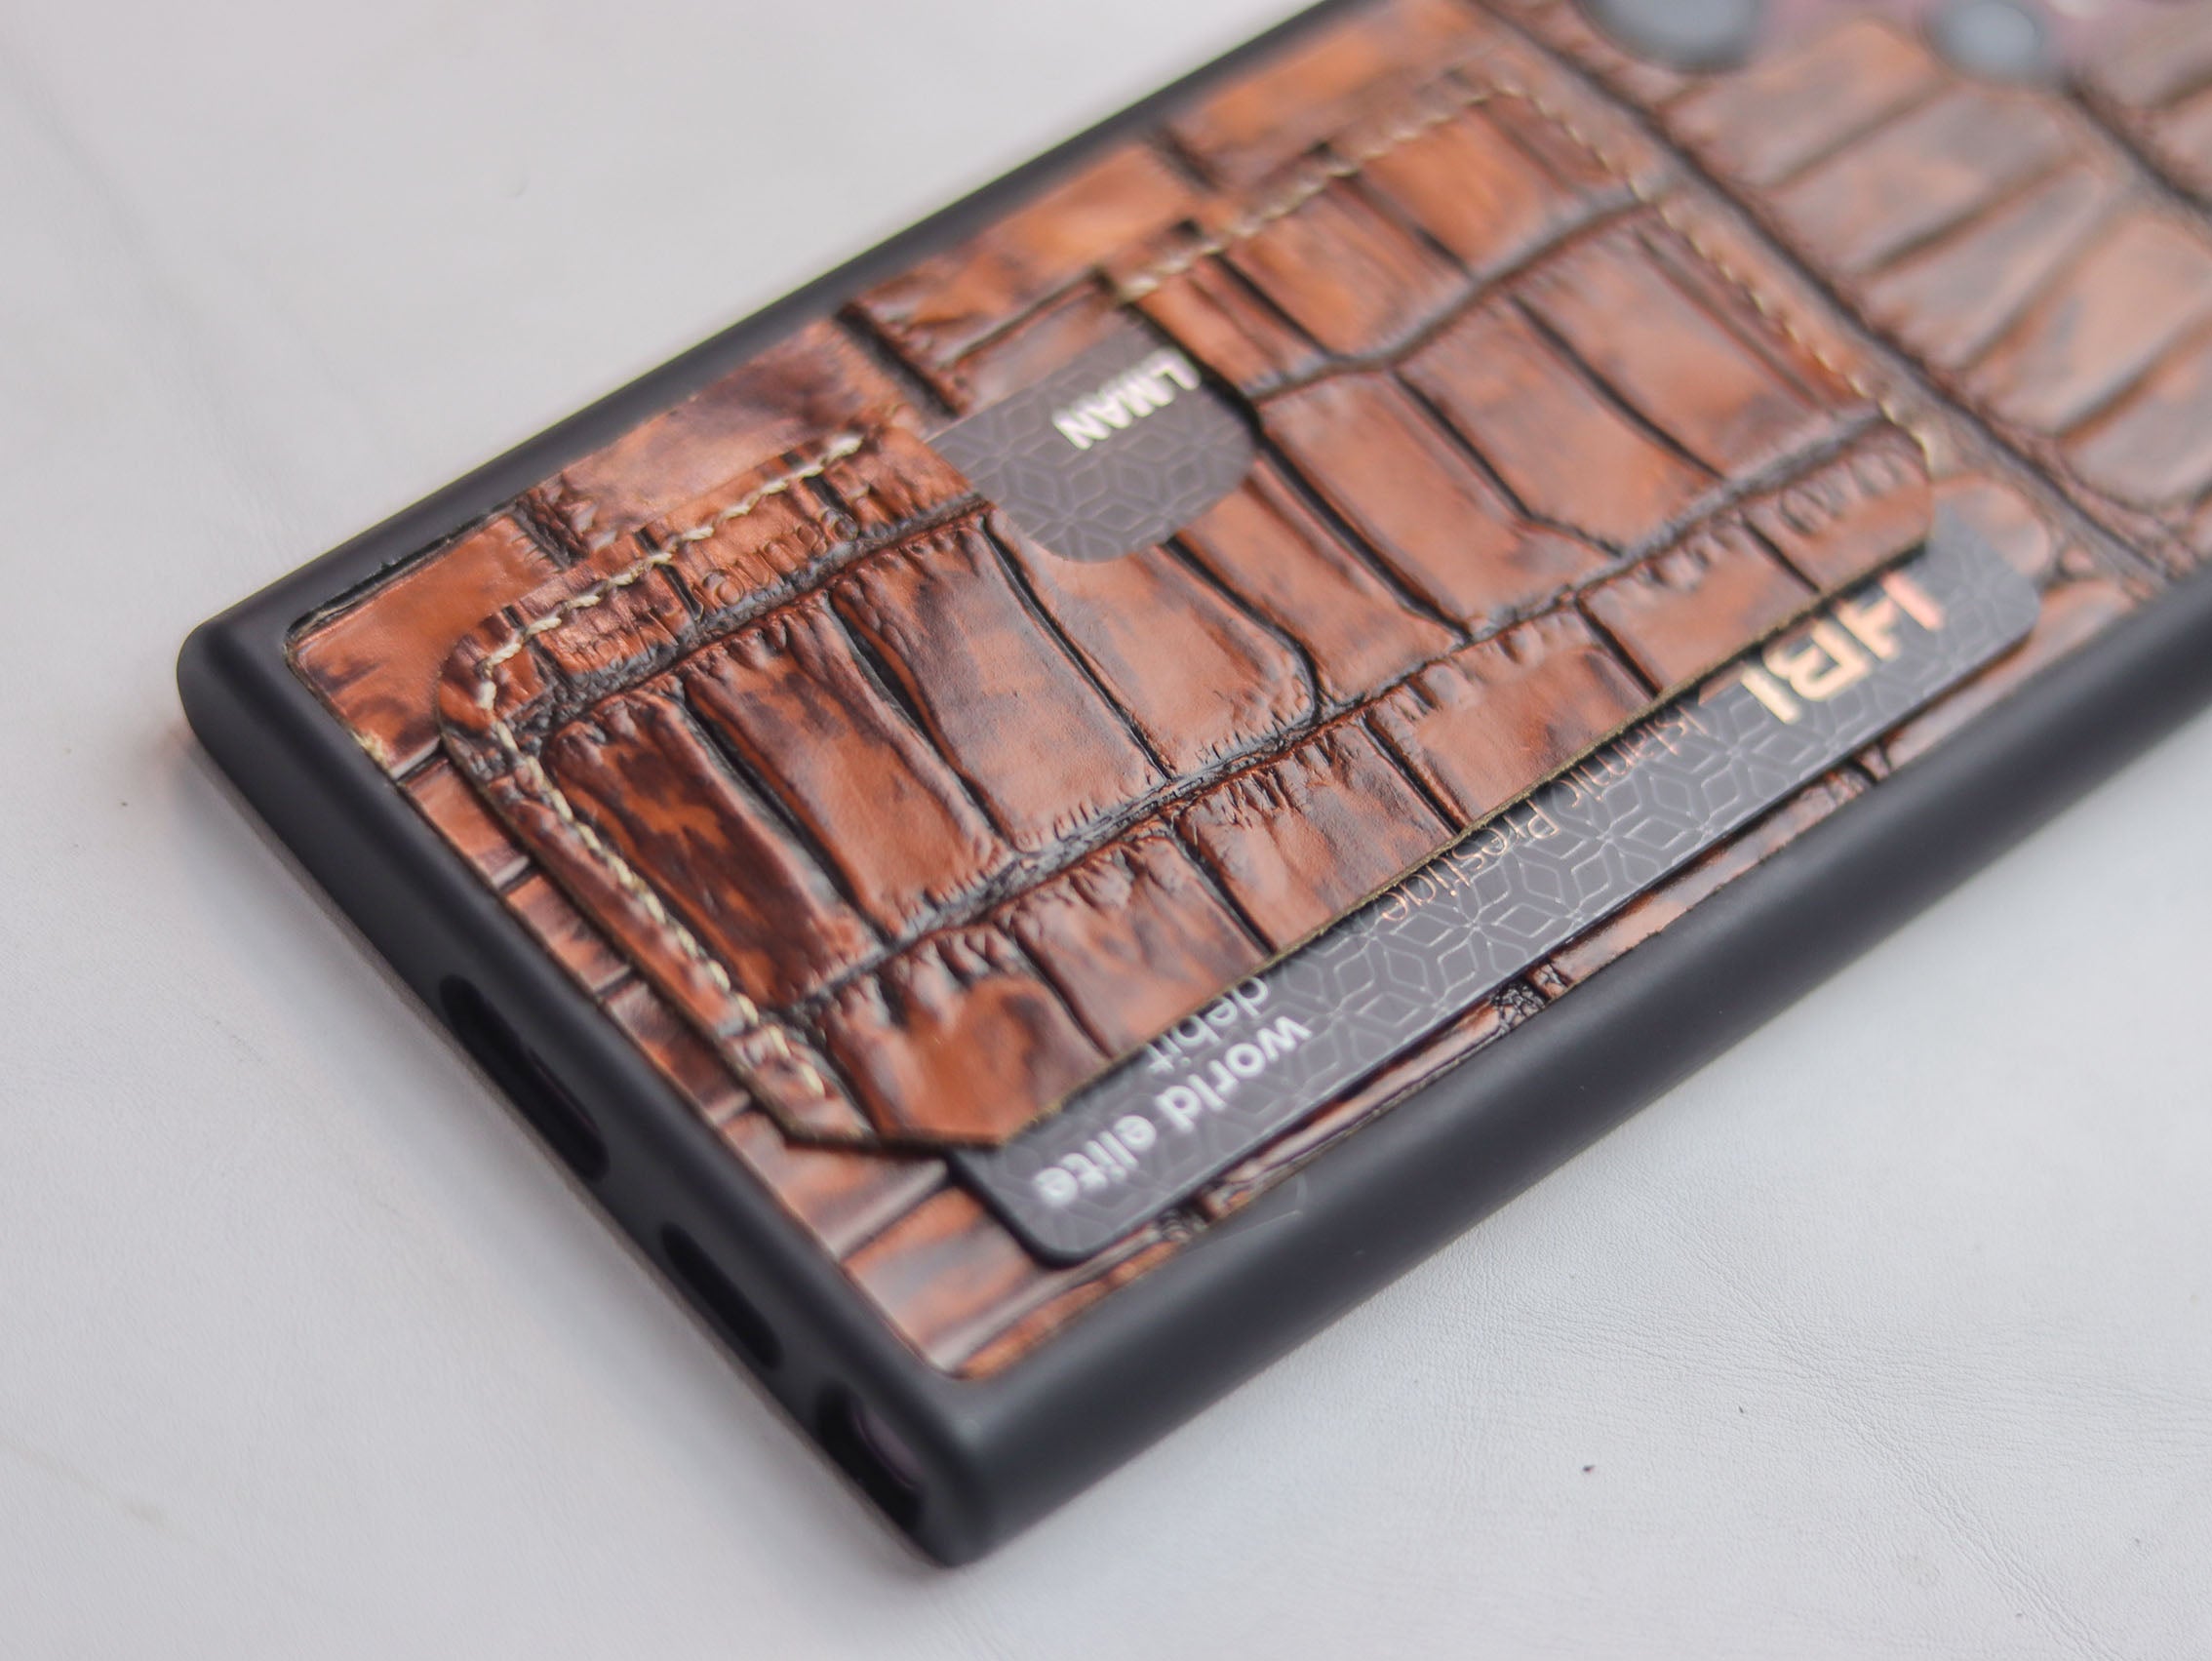 BROWN CROCO (LARGE SCALE) LEATHER WALLET PHONE CASE